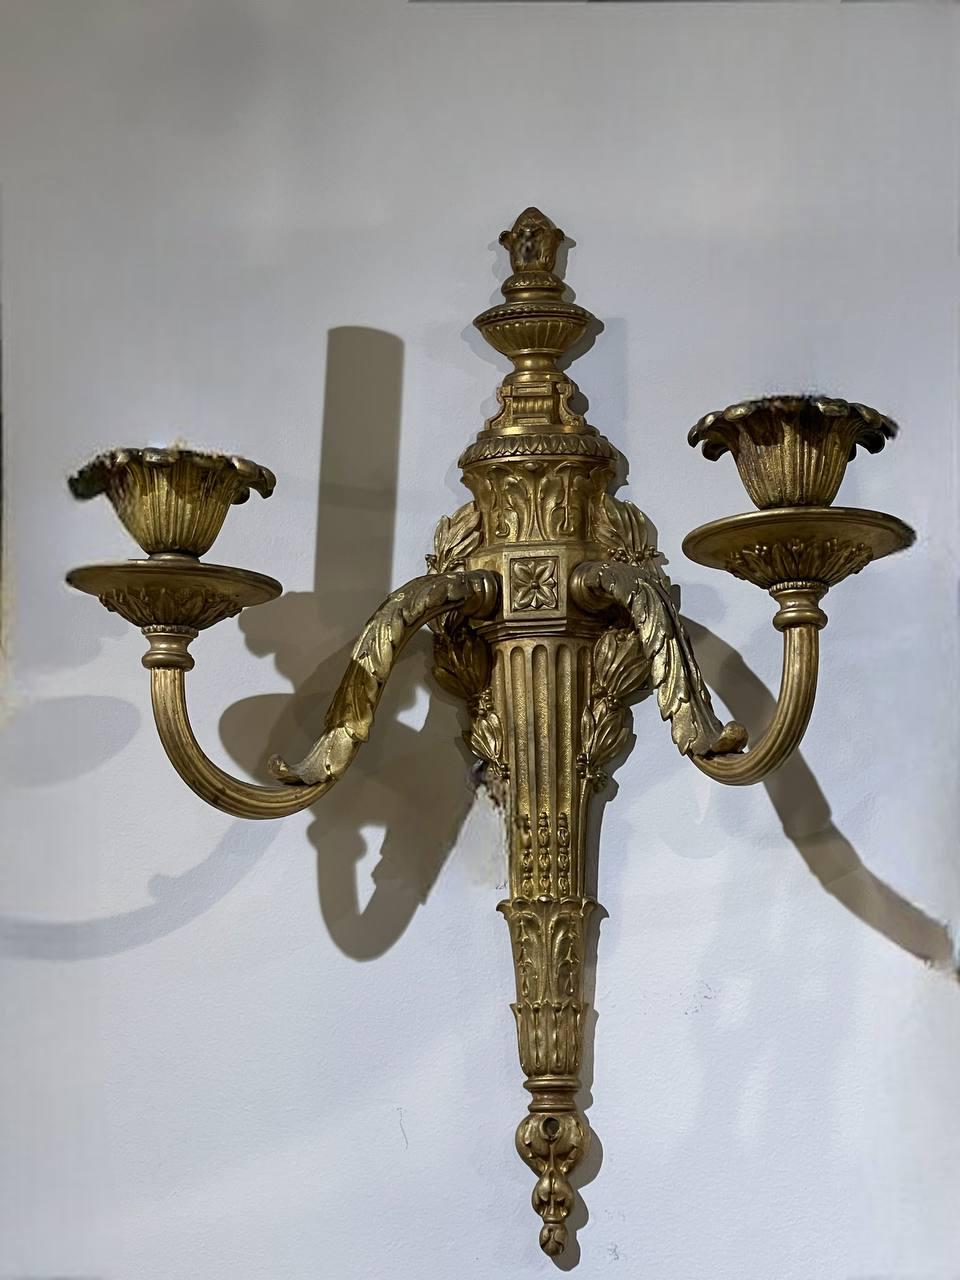 A pair of 1920's Caldwell Empire style bronze double light sconces